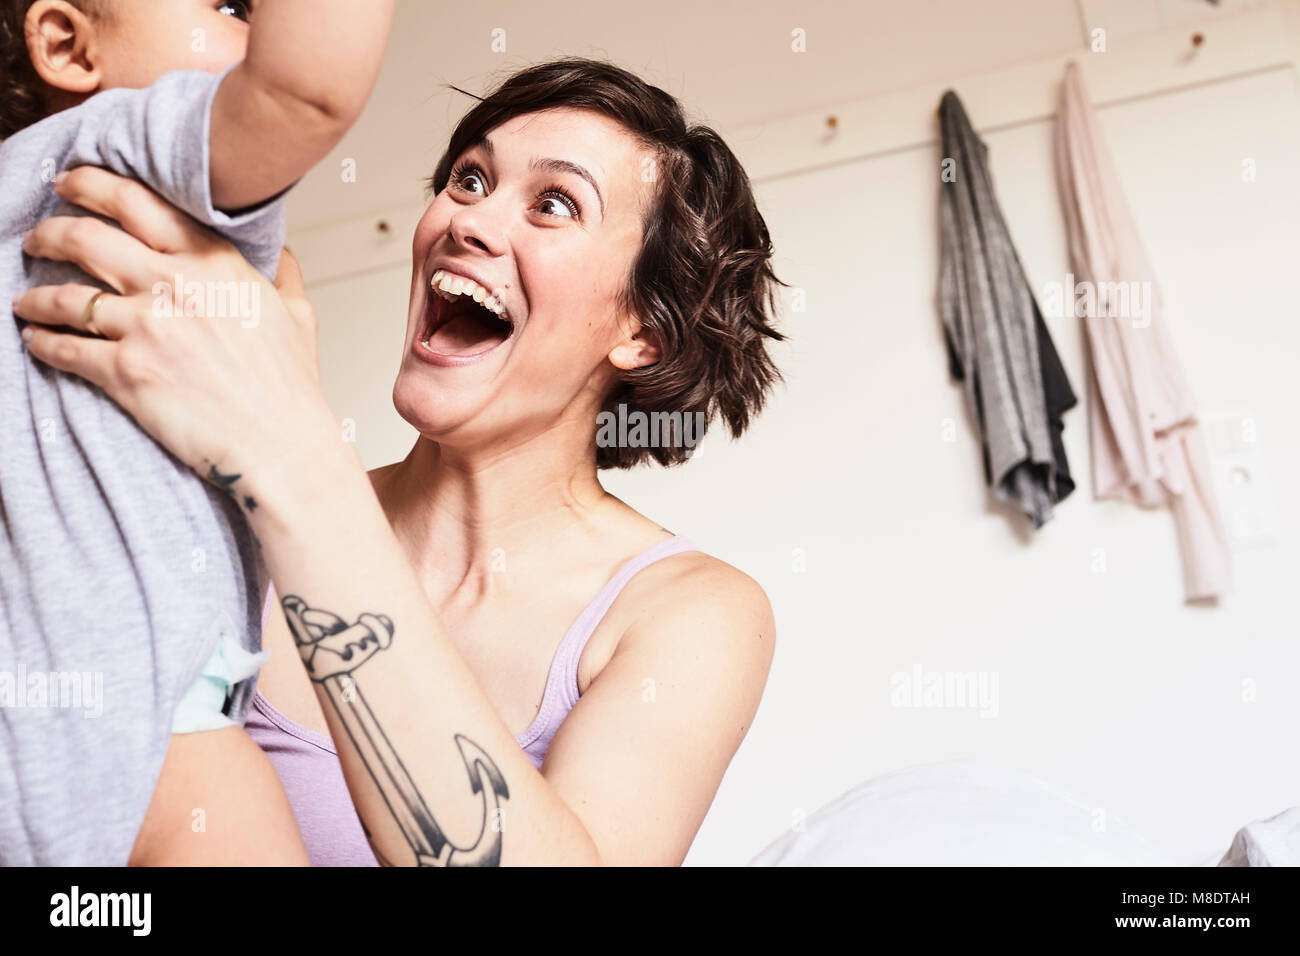 Mother holding baby daughter, face to face, excited expression Stock Photo